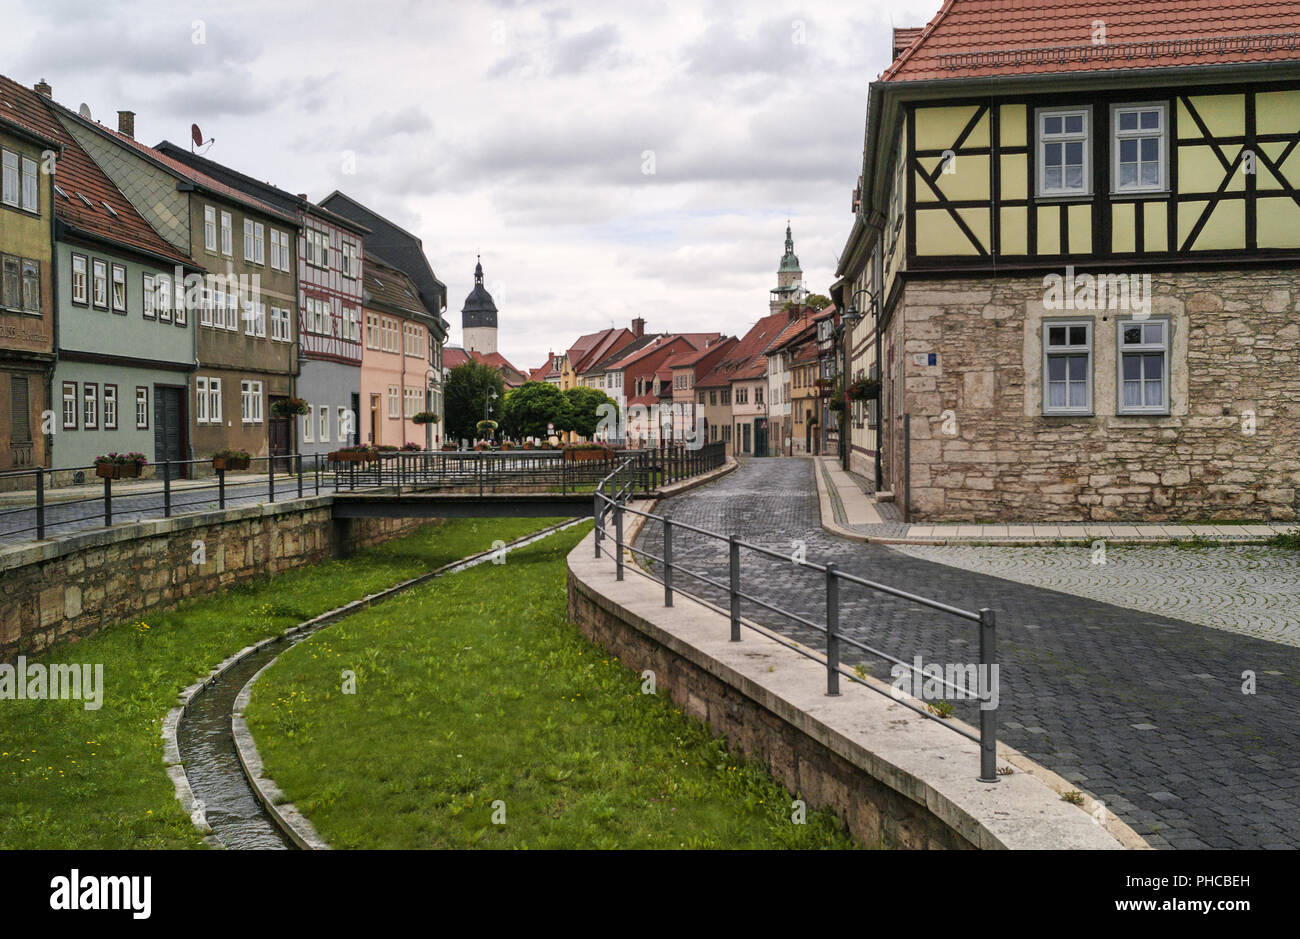 Bad Langensalza - Old Town houses Stock Photo